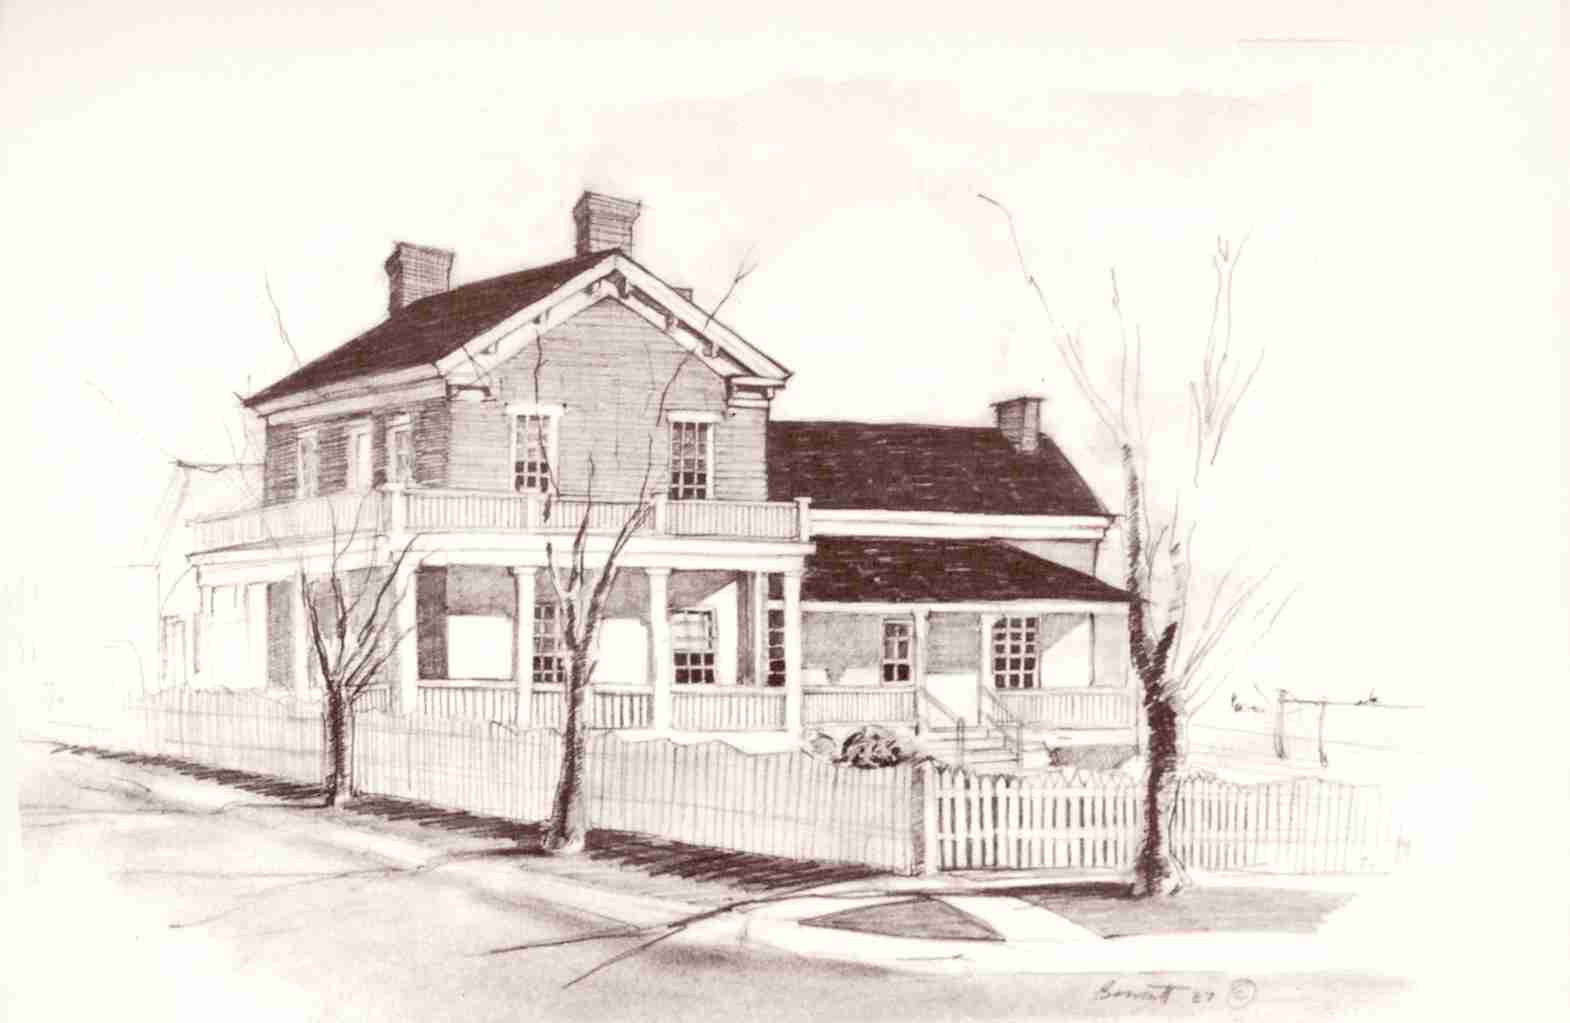 Sketch of the Brigham Young Winter Home